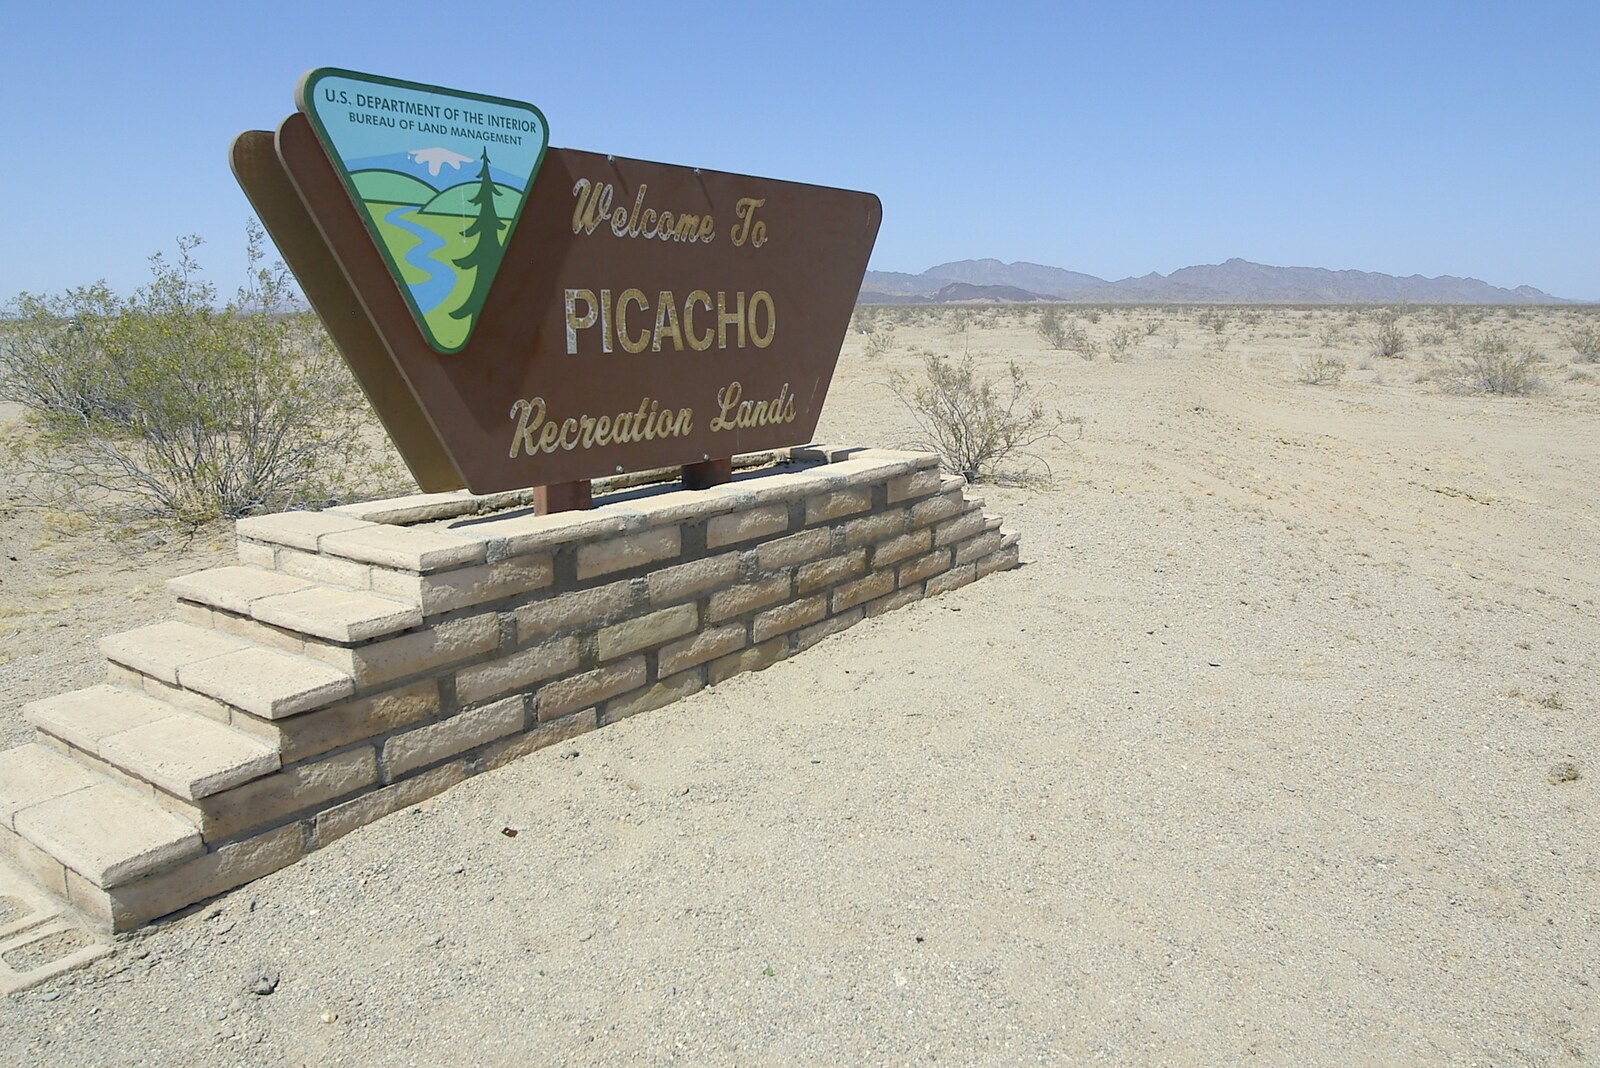 Welcome to Picacho Recreation Lands from San Diego Seven: The Desert and the Dunes, Arizona and California, US - 22nd April